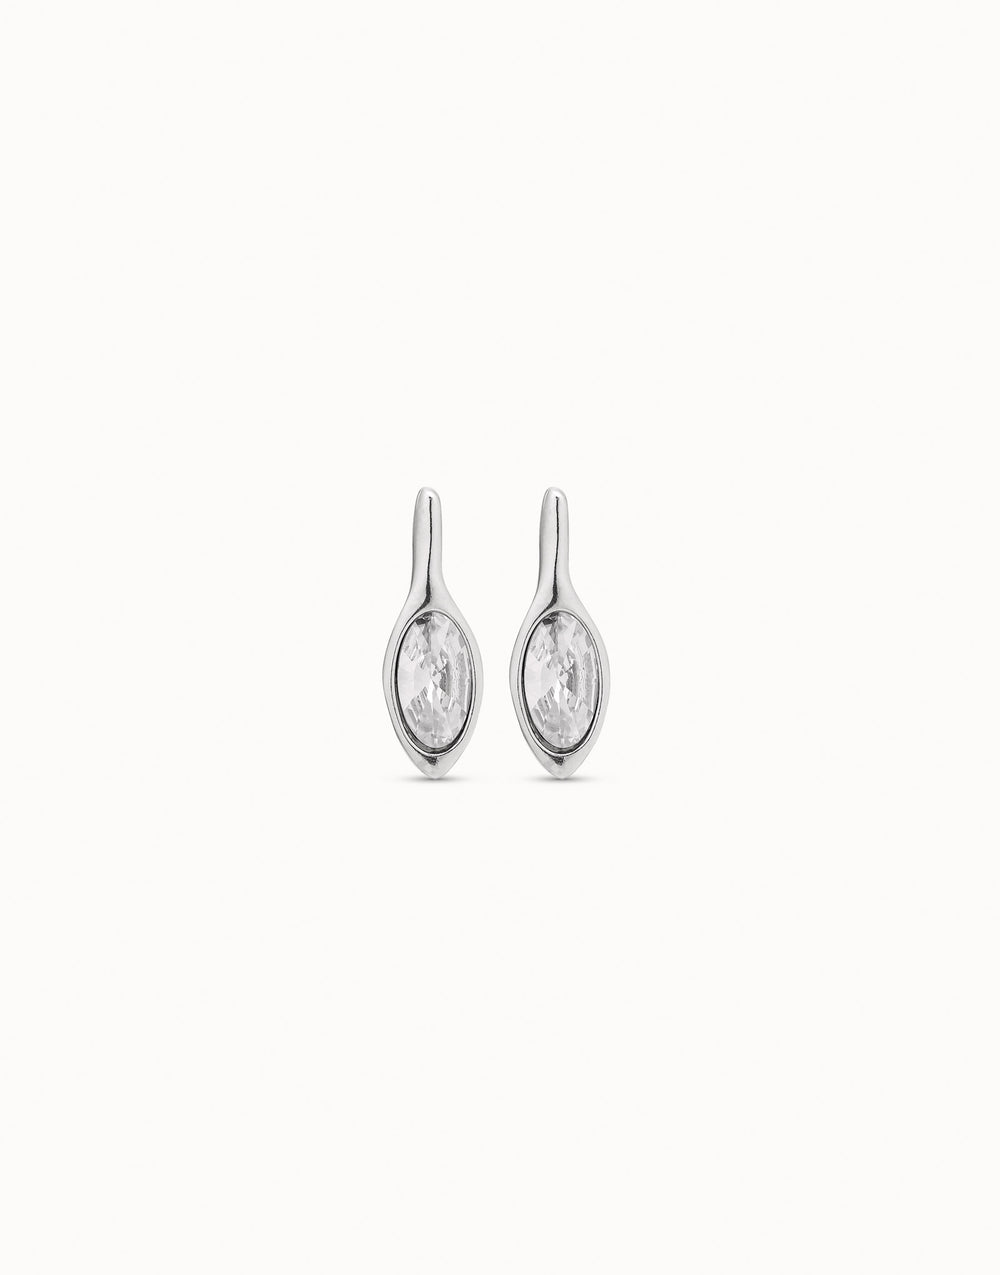 SPRING EARRINGS - SILVER - Kingfisher Road - Online Boutique